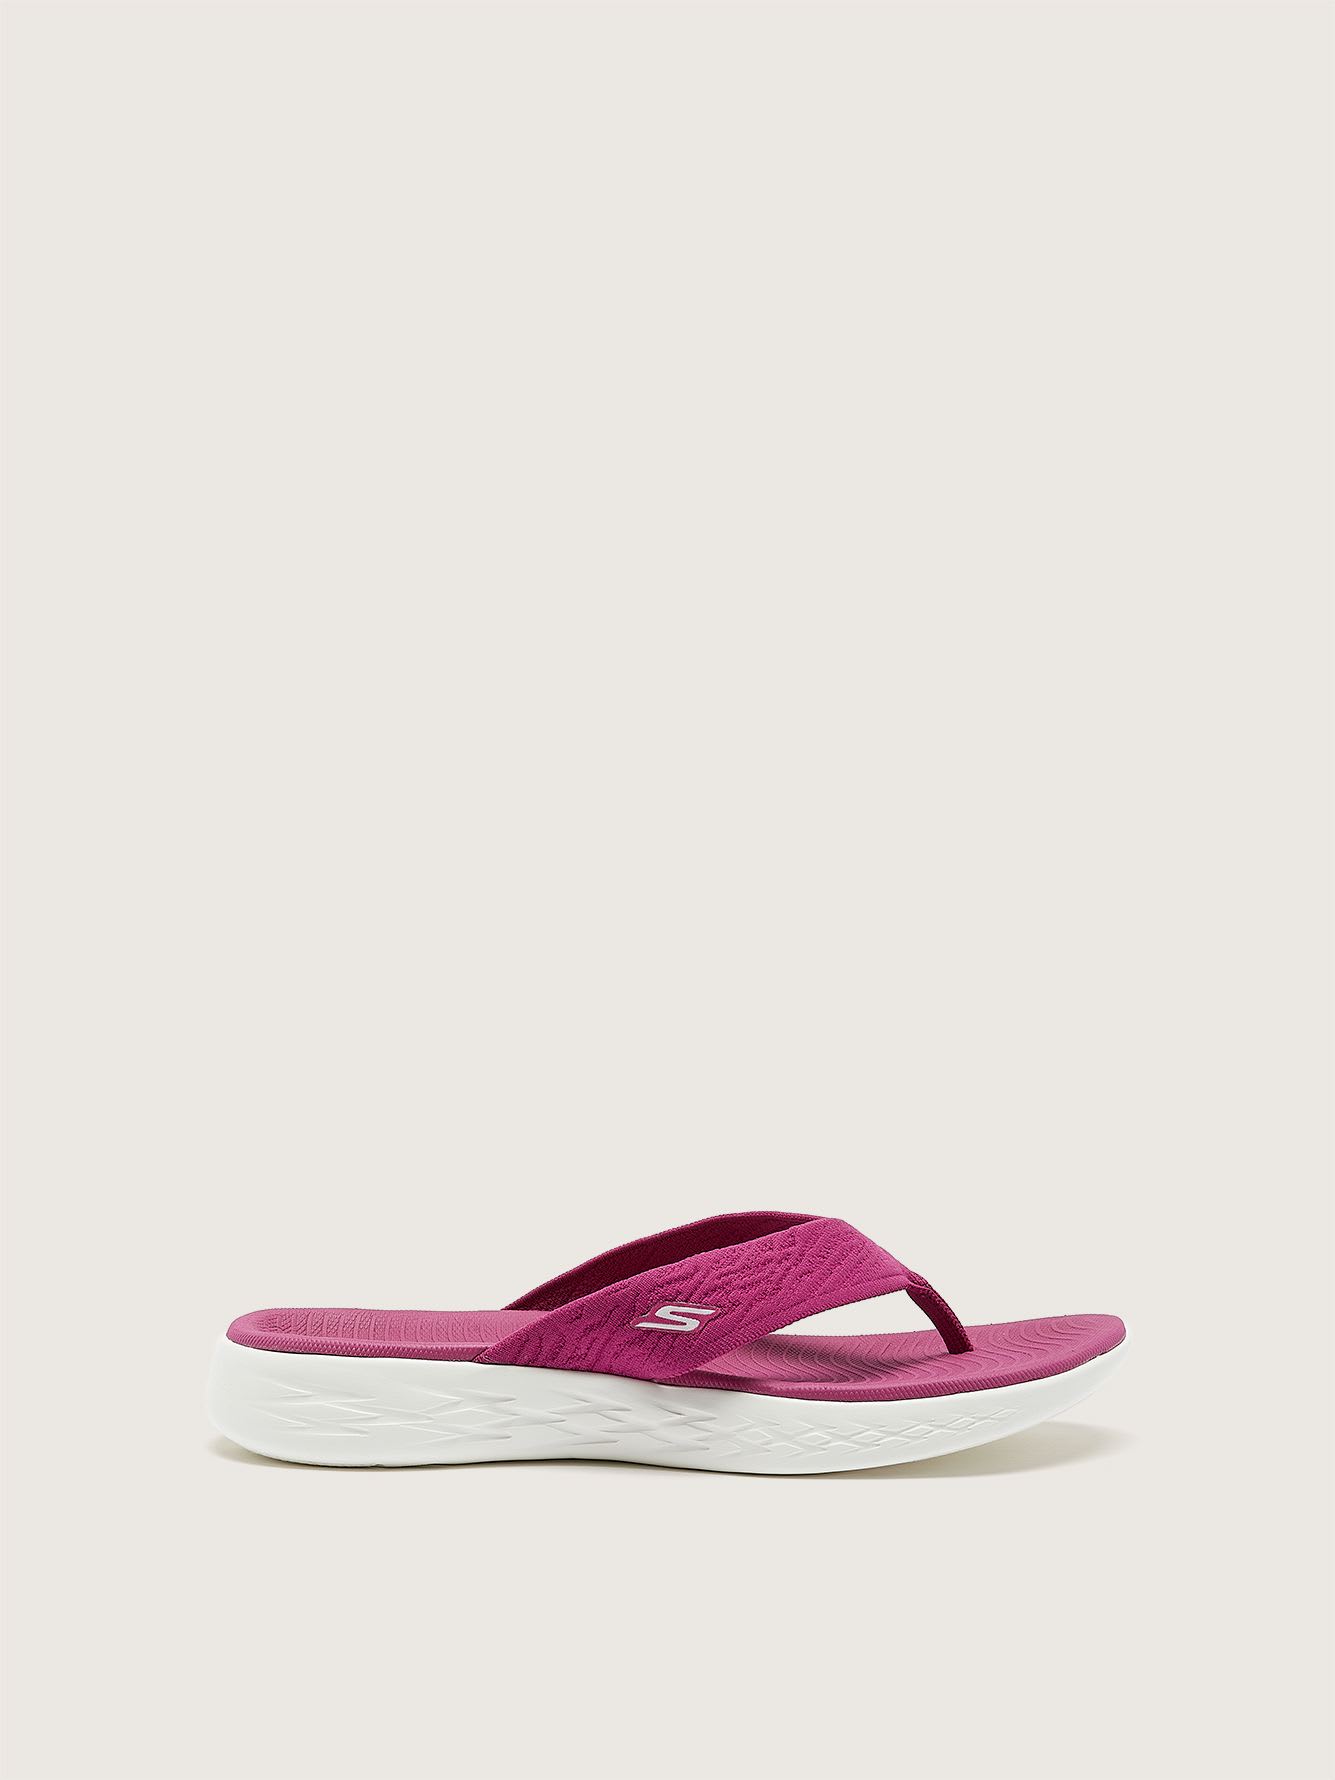 Sandale tong On-the-Go Sunny, pied large - Skechers